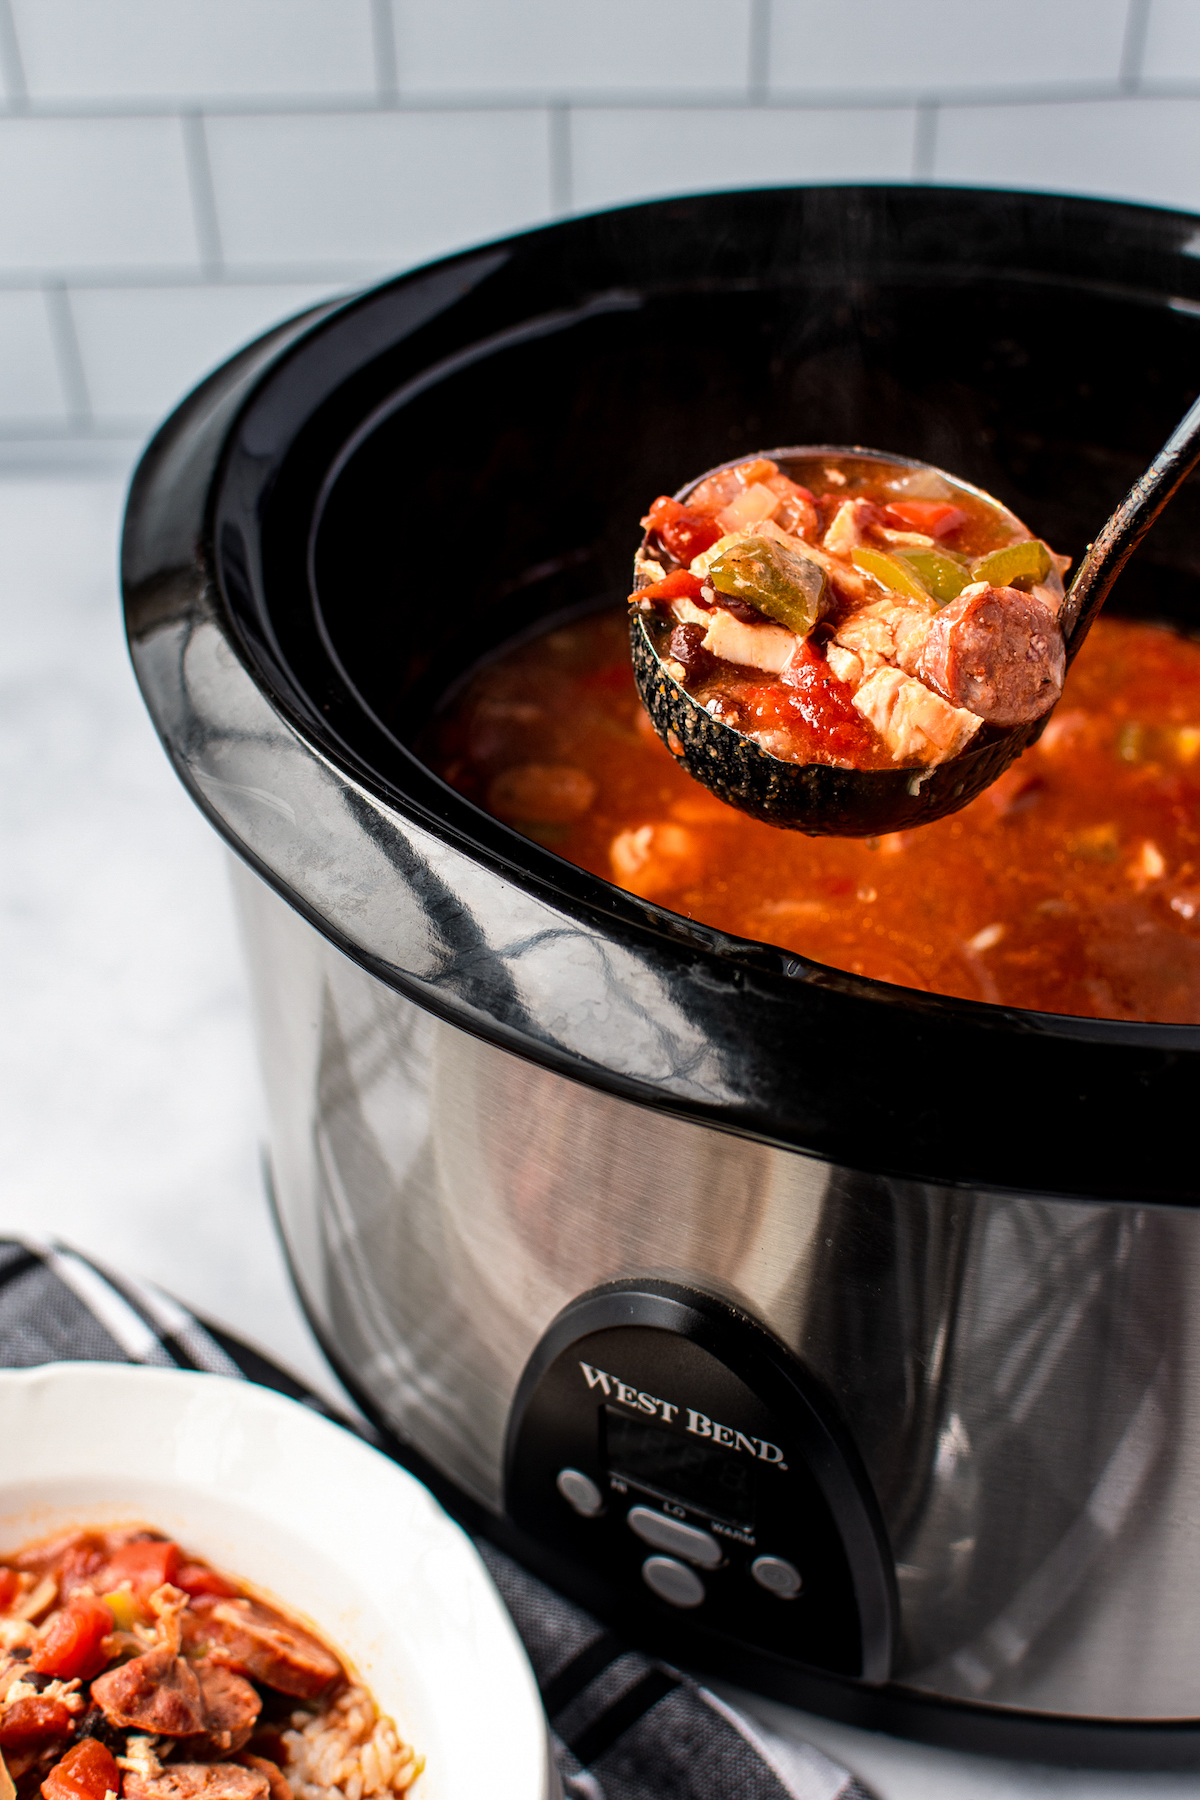 A ladle lifting out chicken, veggies, and sauce from a crockpot.